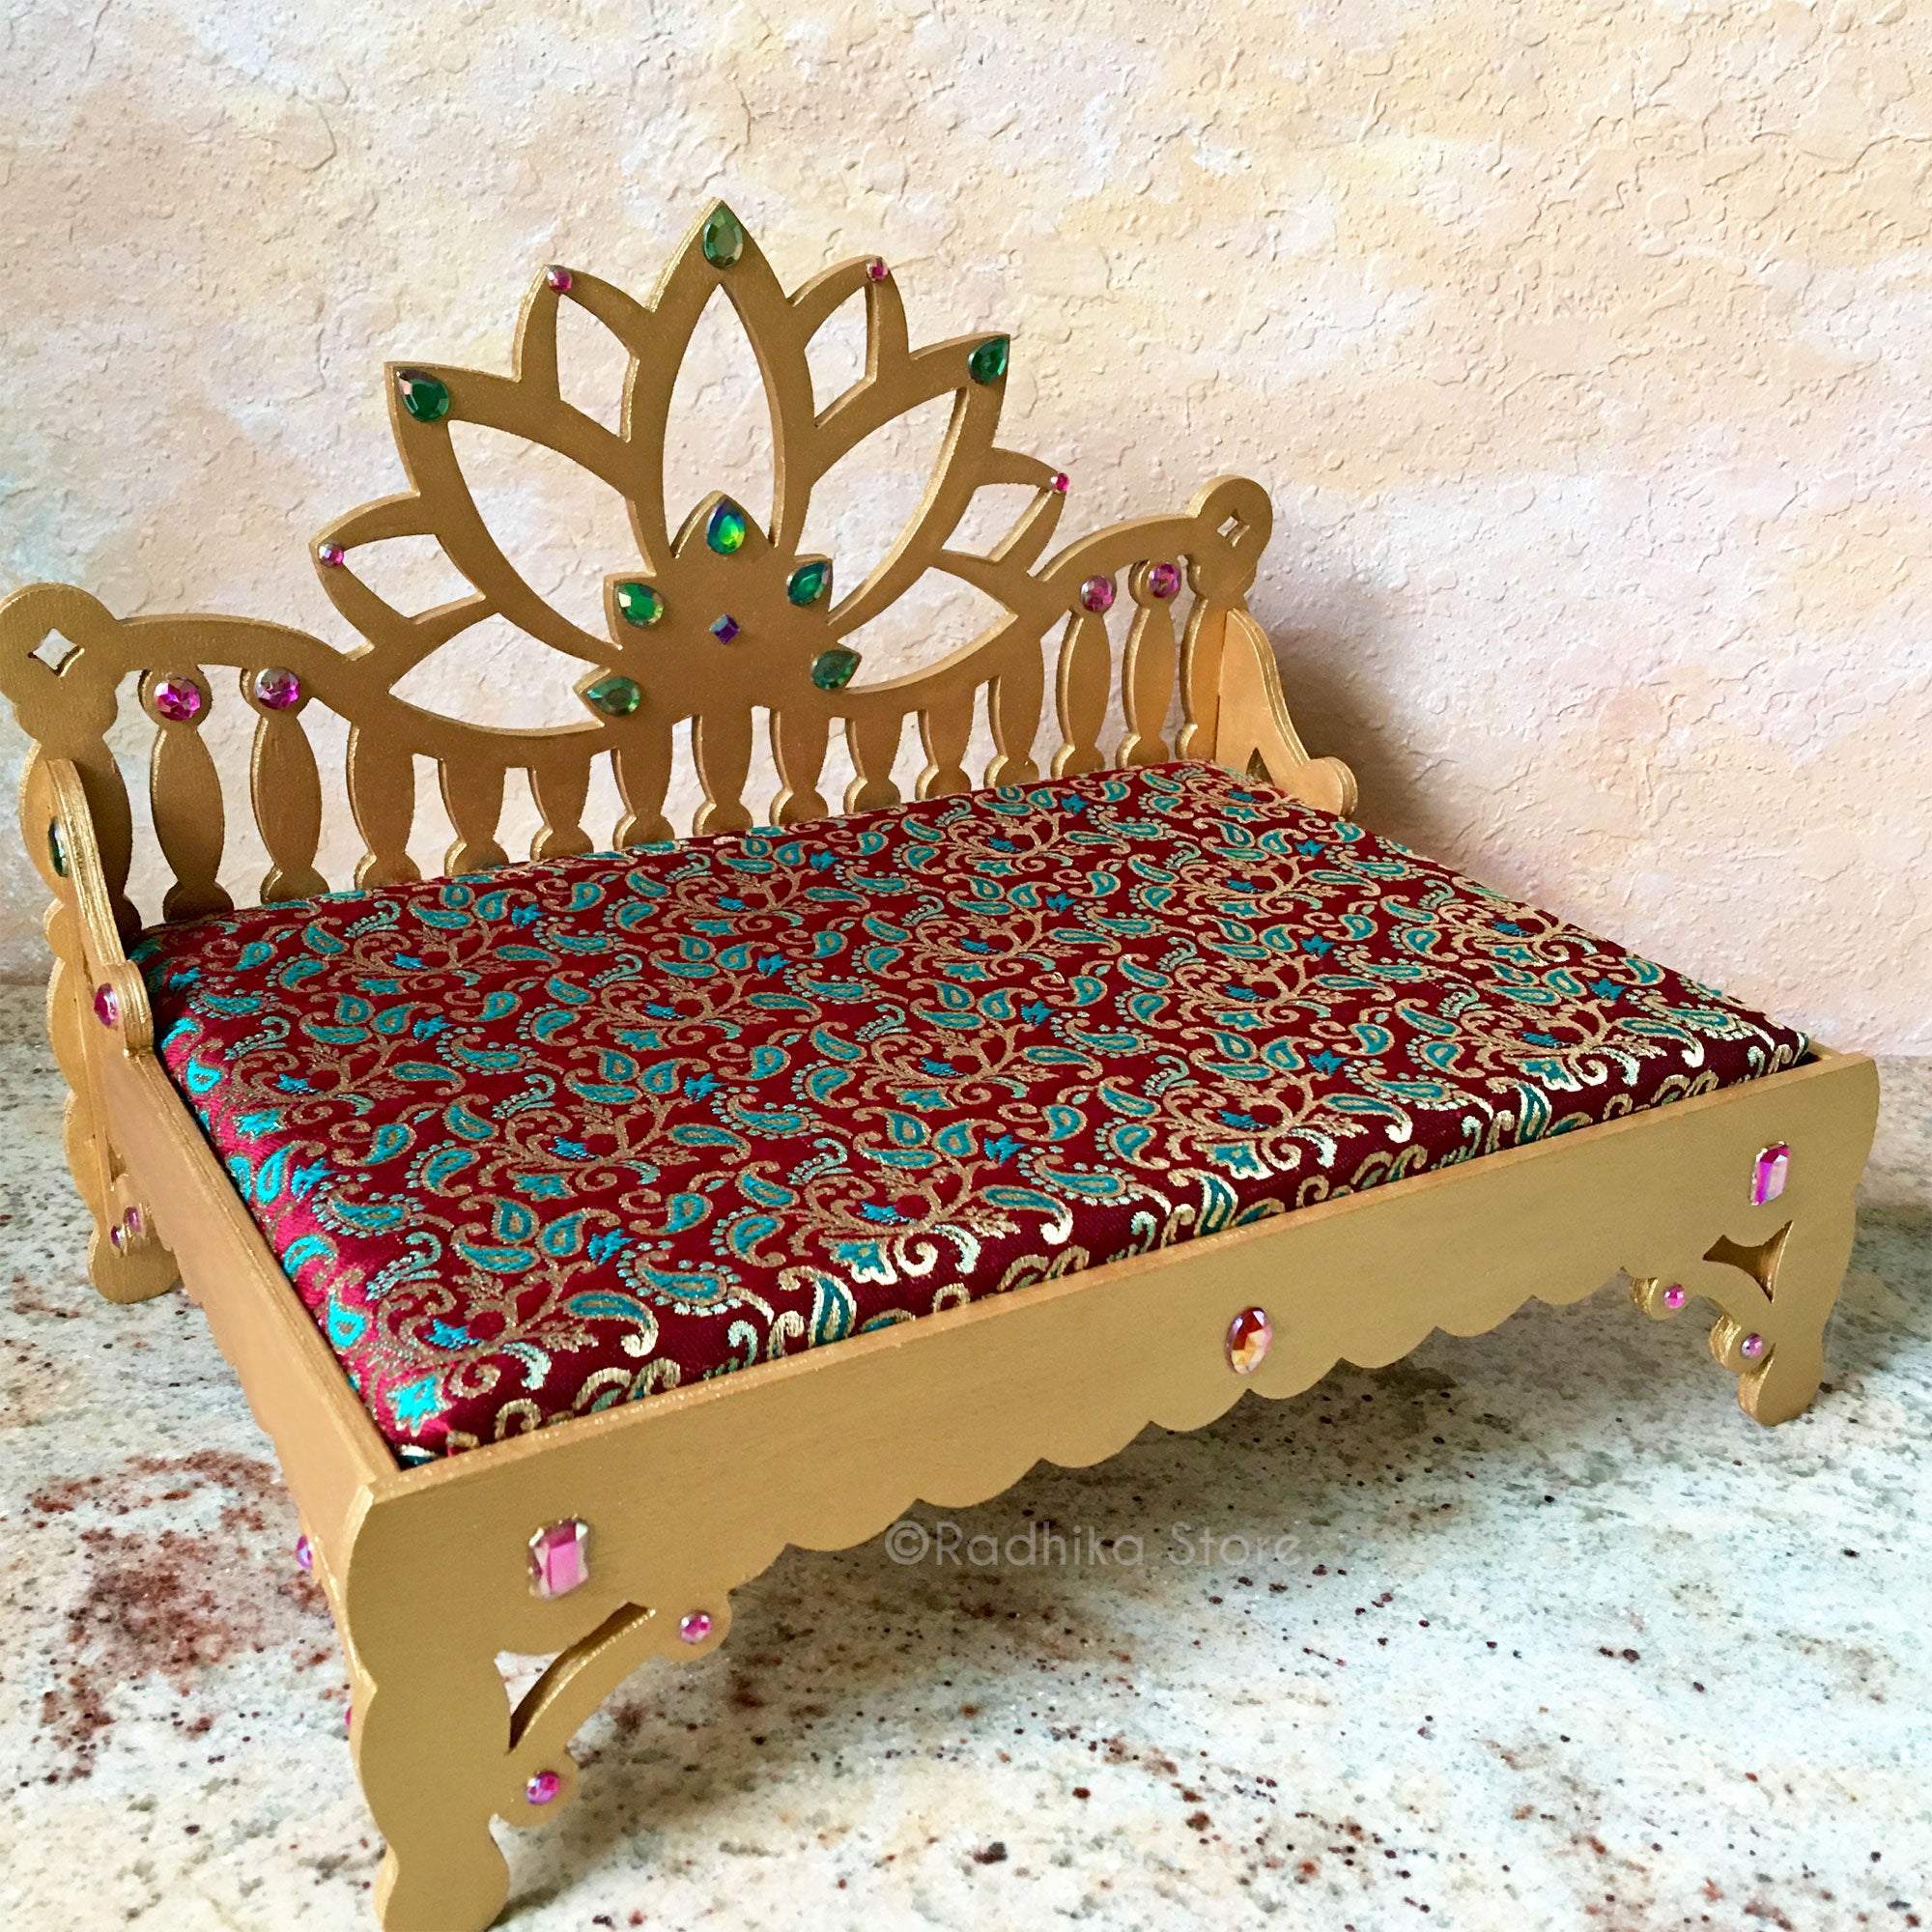 Lotus Flower Jeweled Golden Throne/Bed- Teal and Maroon - 9.5" Long